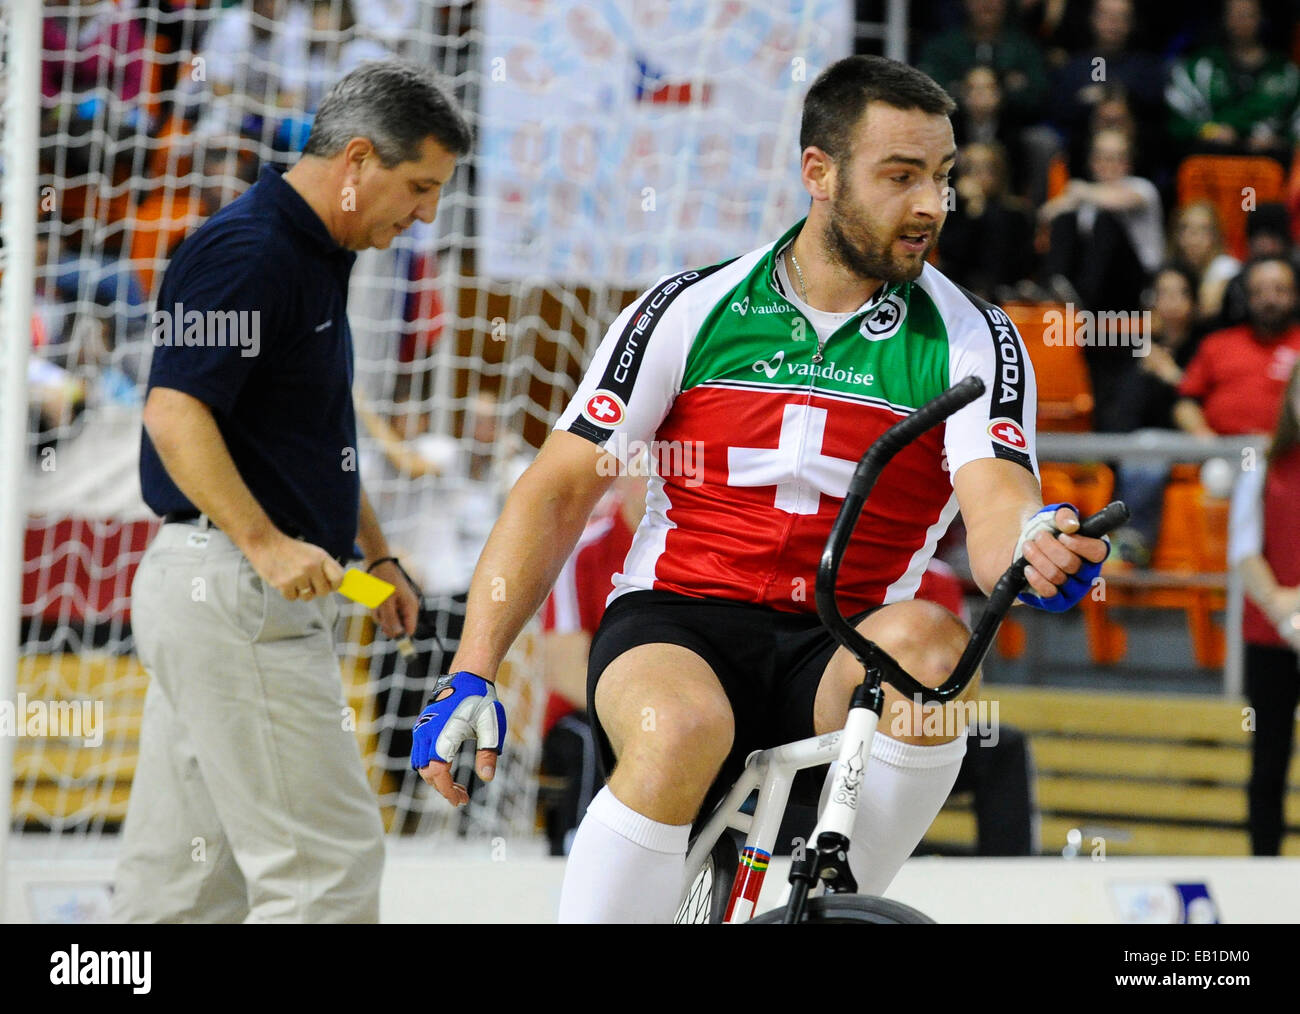 Brno, Czech Republic. 23rd Nov, 2014. Dominik Planzer of Schwitzerland pictured during the Cycle Ball final at the Indoor Cycling World Championships 2014 in Brno, Czech Republic, November 23, 2014. © Vaclav Salek/CTK Photo/Alamy Live News Stock Photo